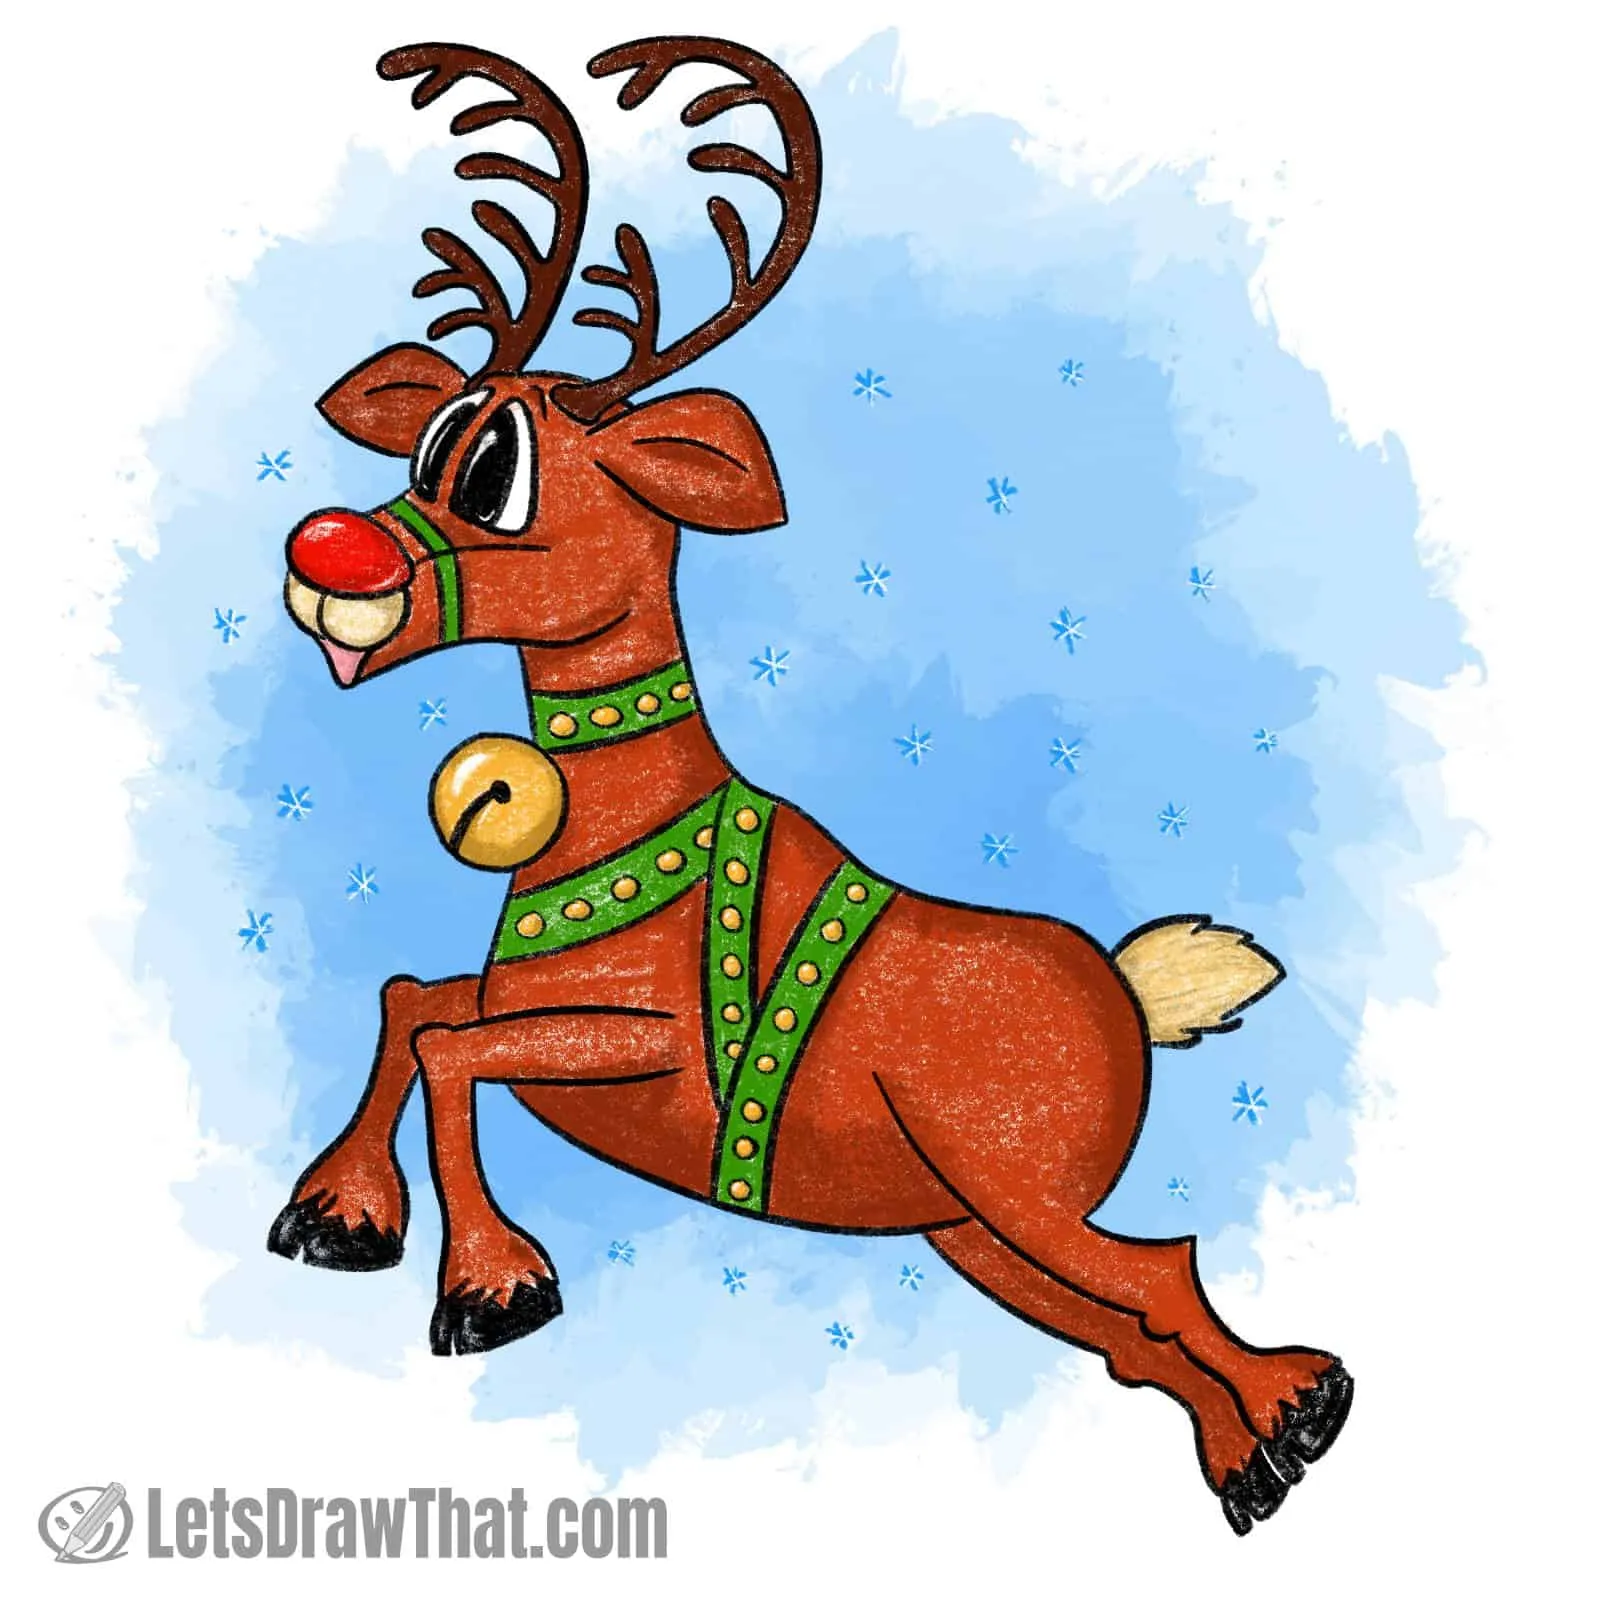 Reindeer drawing Cut Out Stock Images & Pictures - Alamy